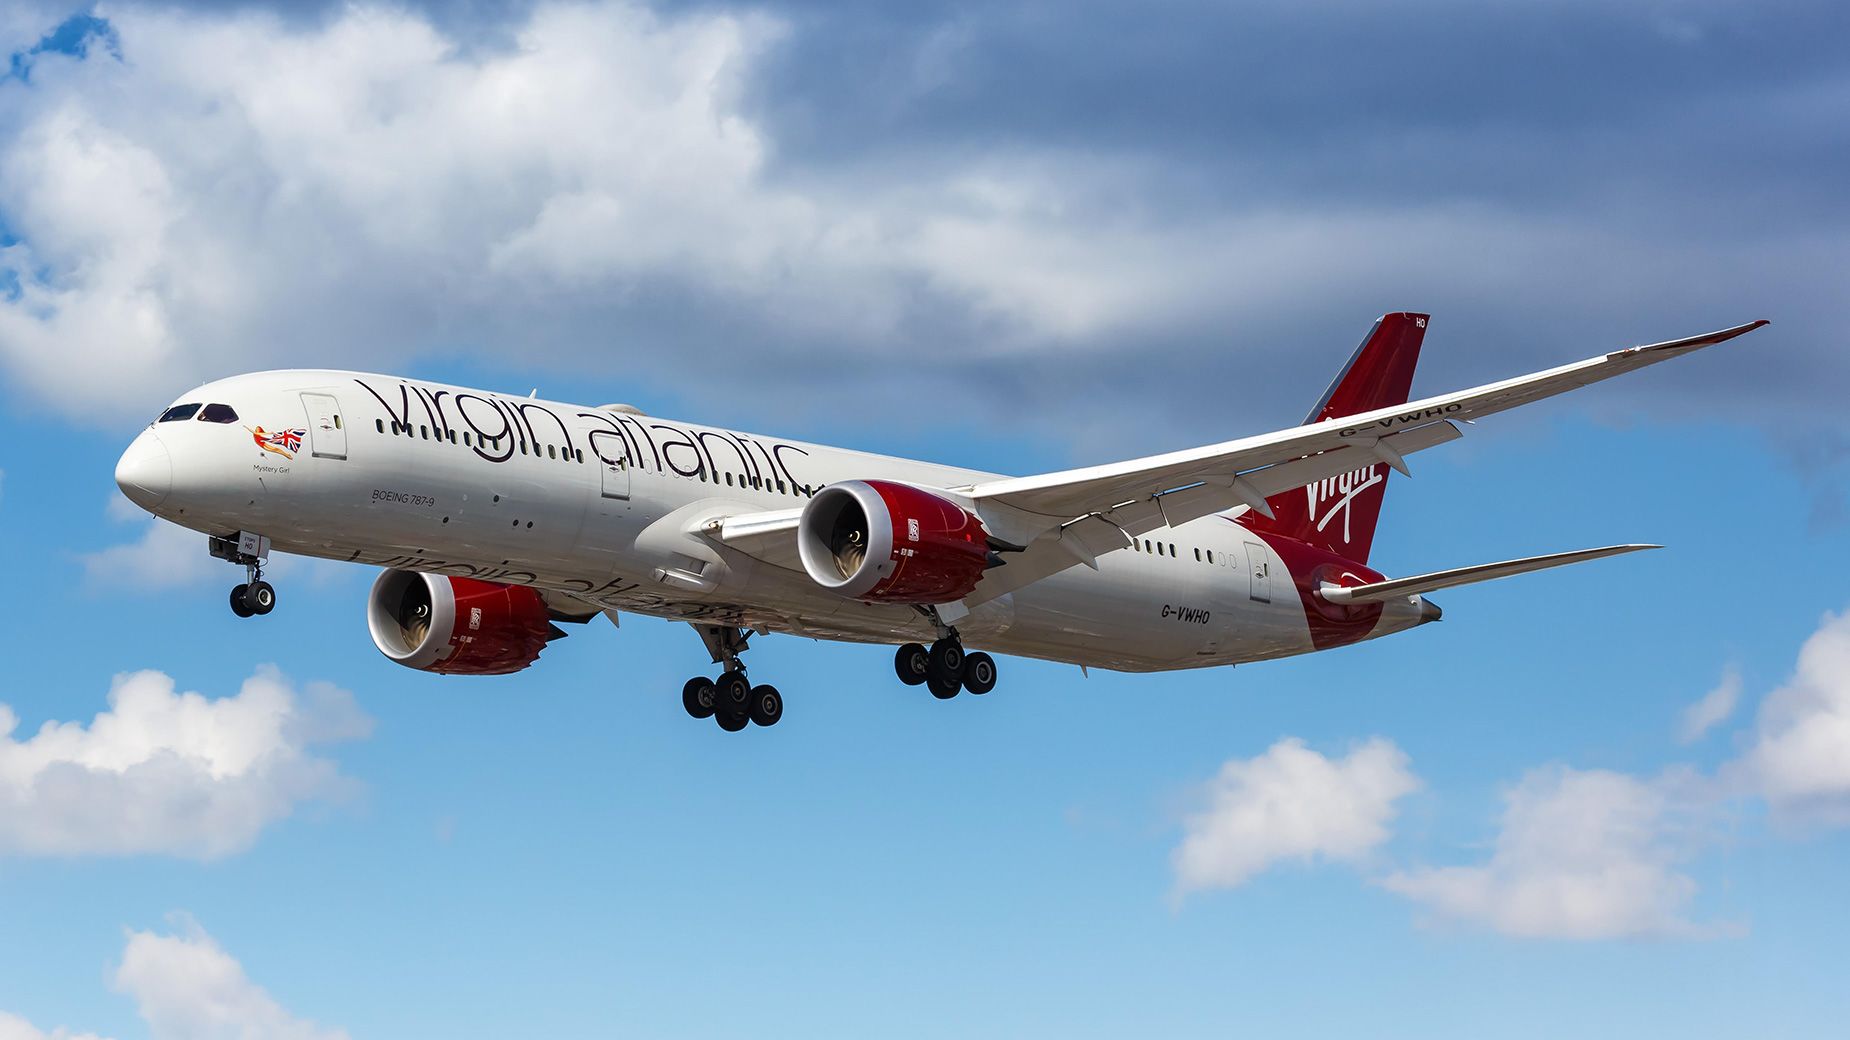 A Virgin Atlantic Boeing 787-9 Dreamliner aircraft landing at London Heathrow Airport. A Virgin Atlantic 787 will make the first-ever transatlantic flight by a commercial airline using 100% SAF.